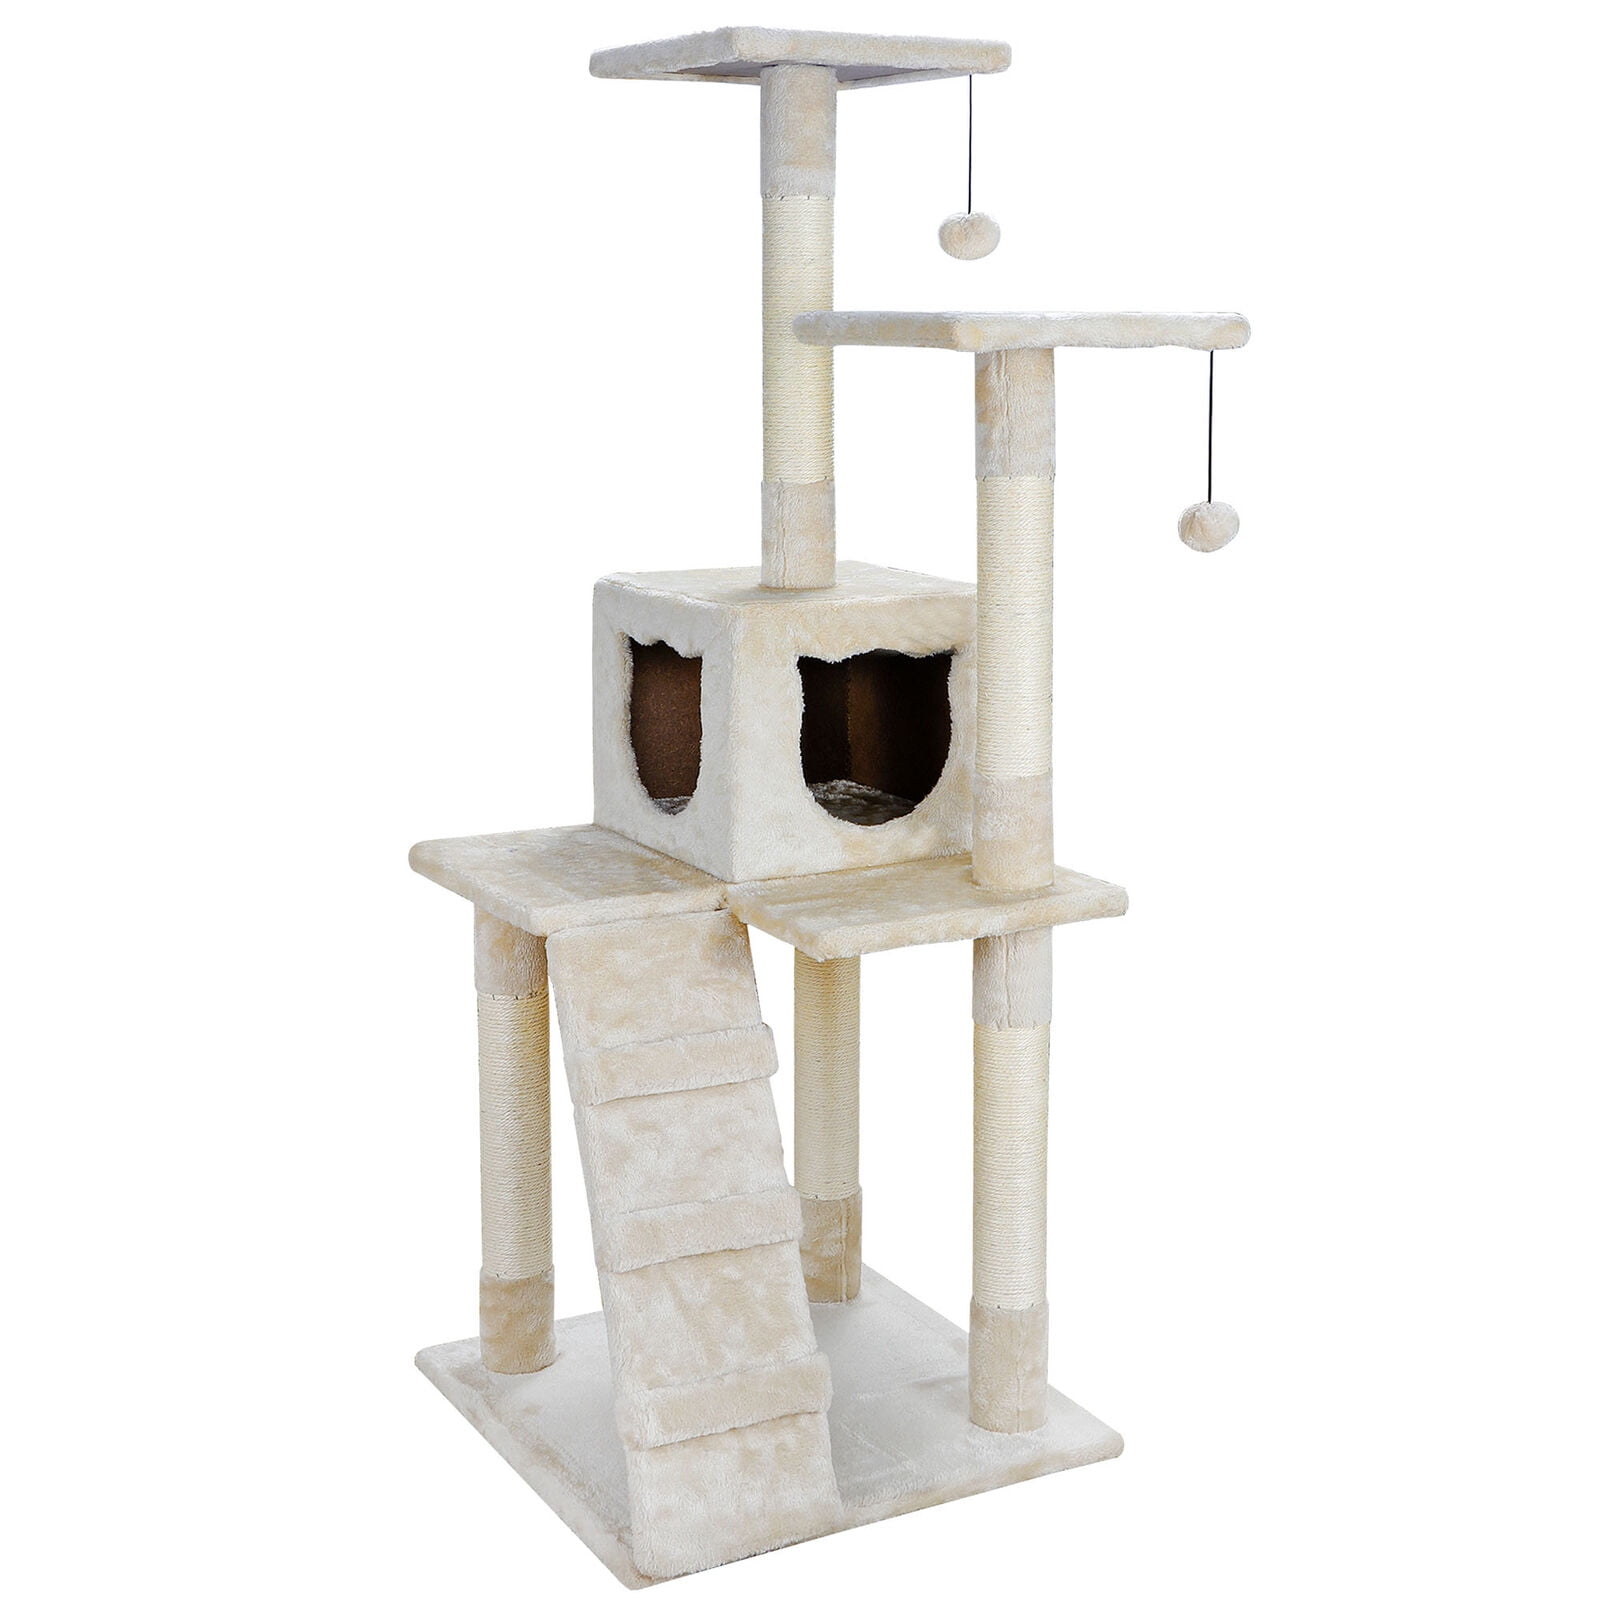 56 inch Cat Tree Sisal Scratcher Condo Post Pet Tower Kitty Play House,Blue 